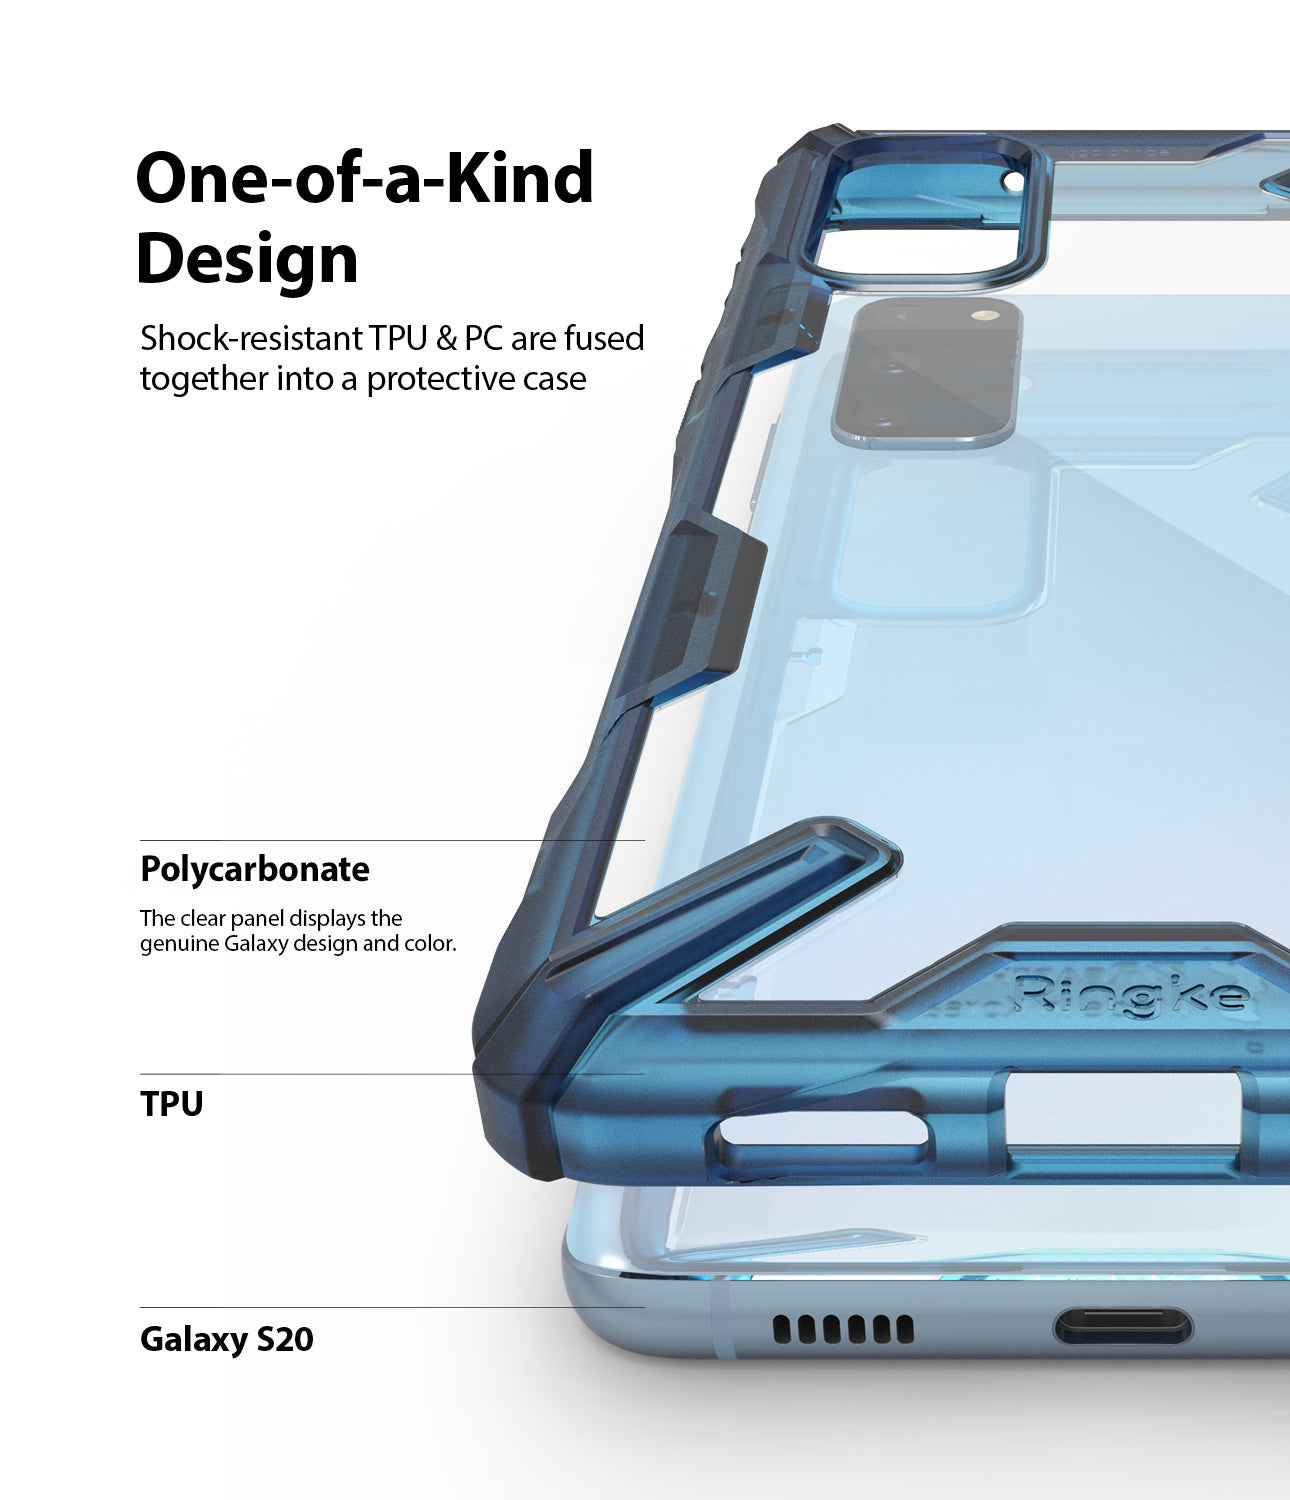 Ringke Galaxy S20 Fusion-X Case Space Blue Color